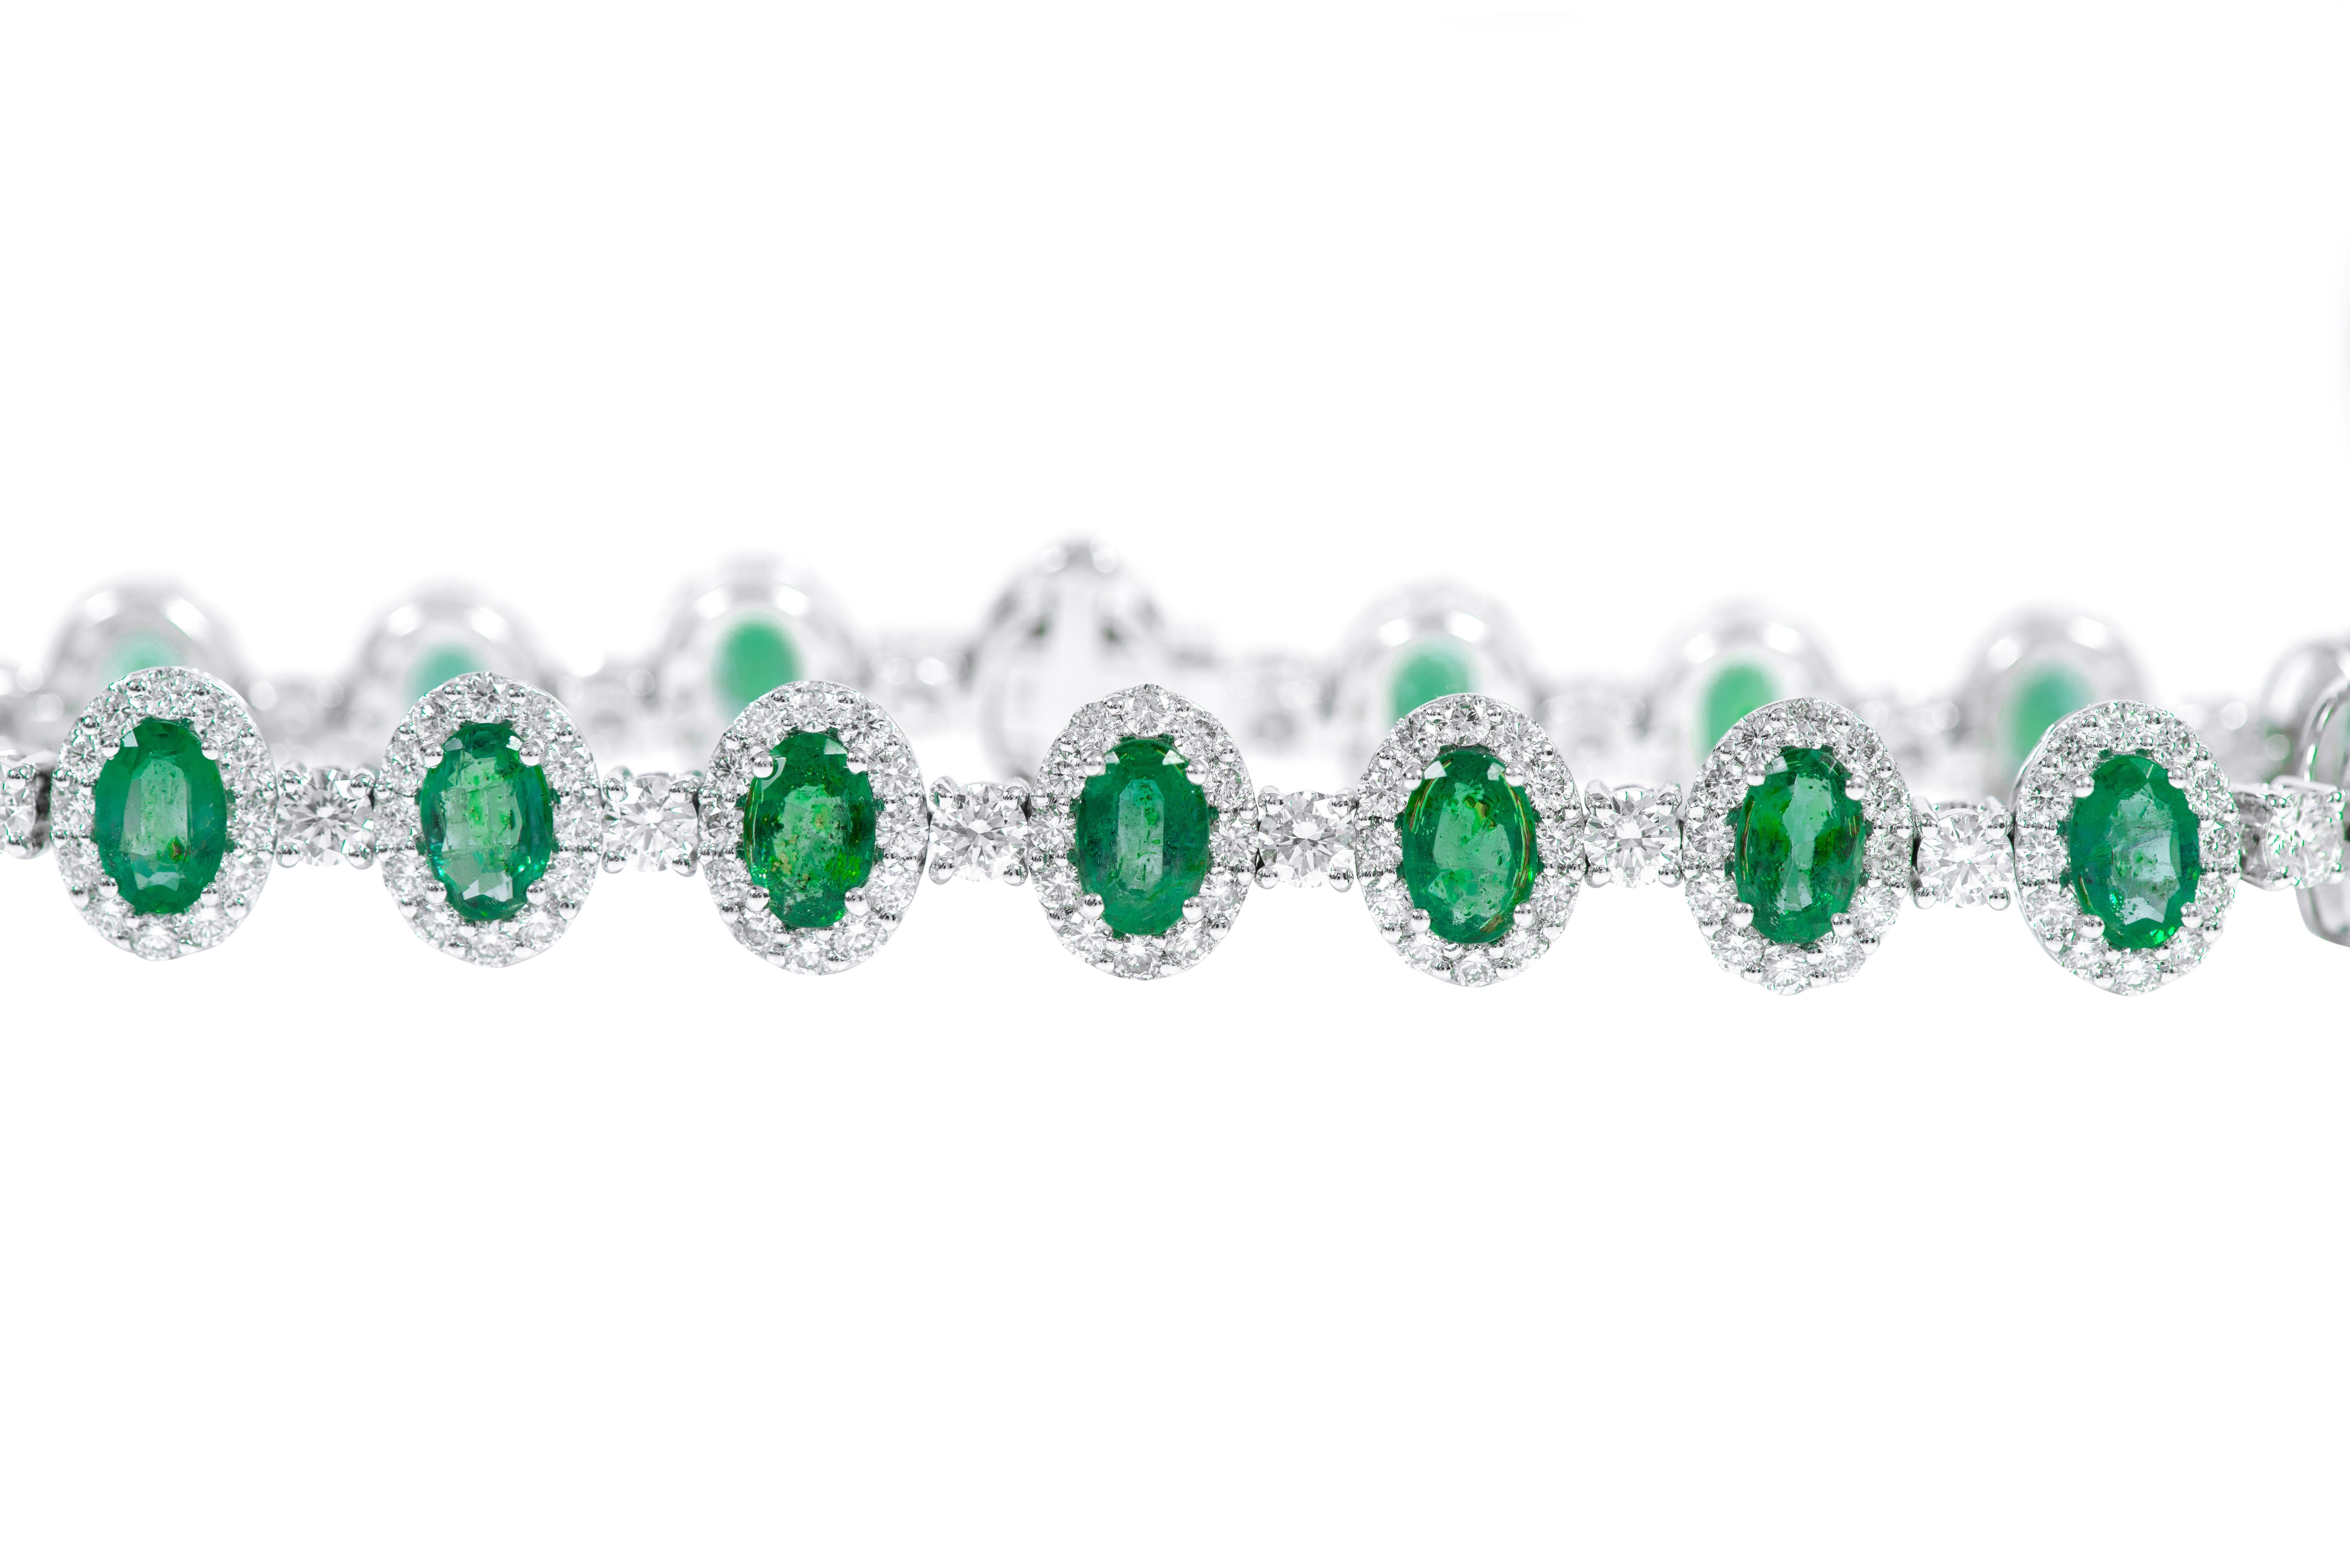 18 Karat White Gold 7.07 Carat Natural Emerald and Diamond Cluster Modern Bracelet

This impressive vibrant green emerald and diamond tennis bracelet is remarkably brilliant. The solitaire oval emeralds are magnificently surrounded with a layer of